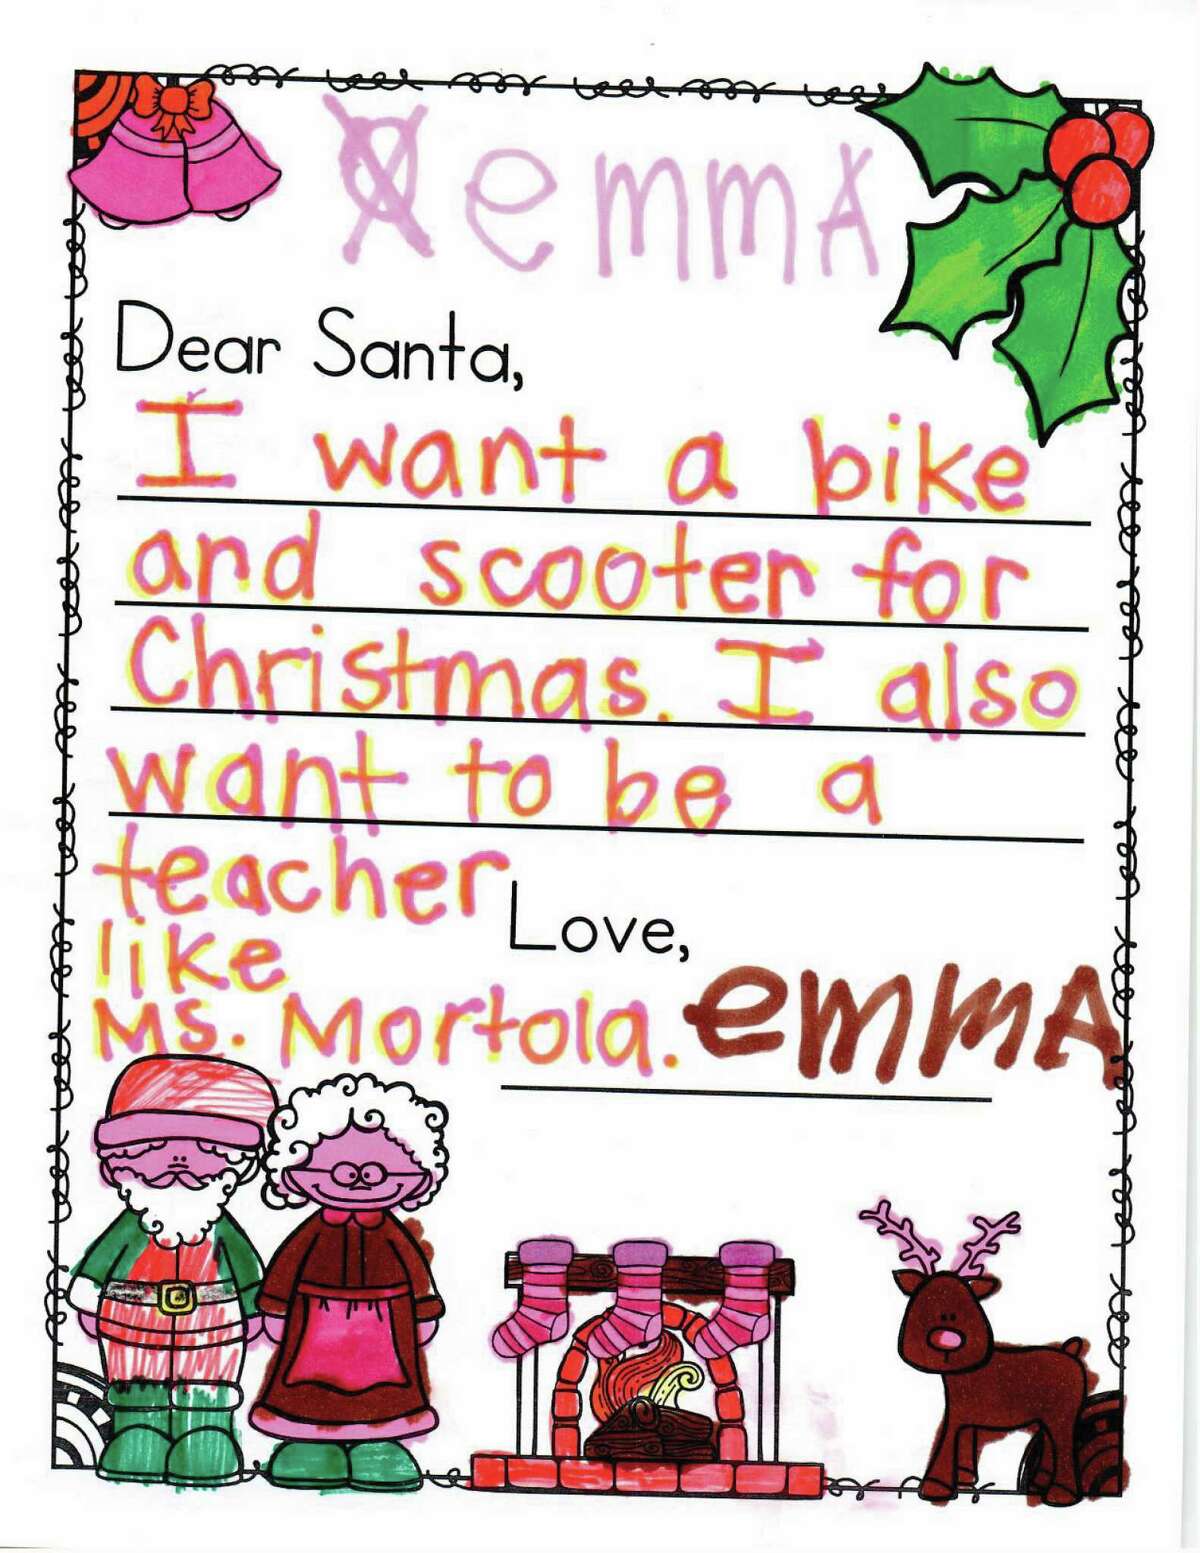 Students from Meadow Wood Elementary sat down and penned letters to Santa. Their joy, innocence, and wisdom is inspiring.